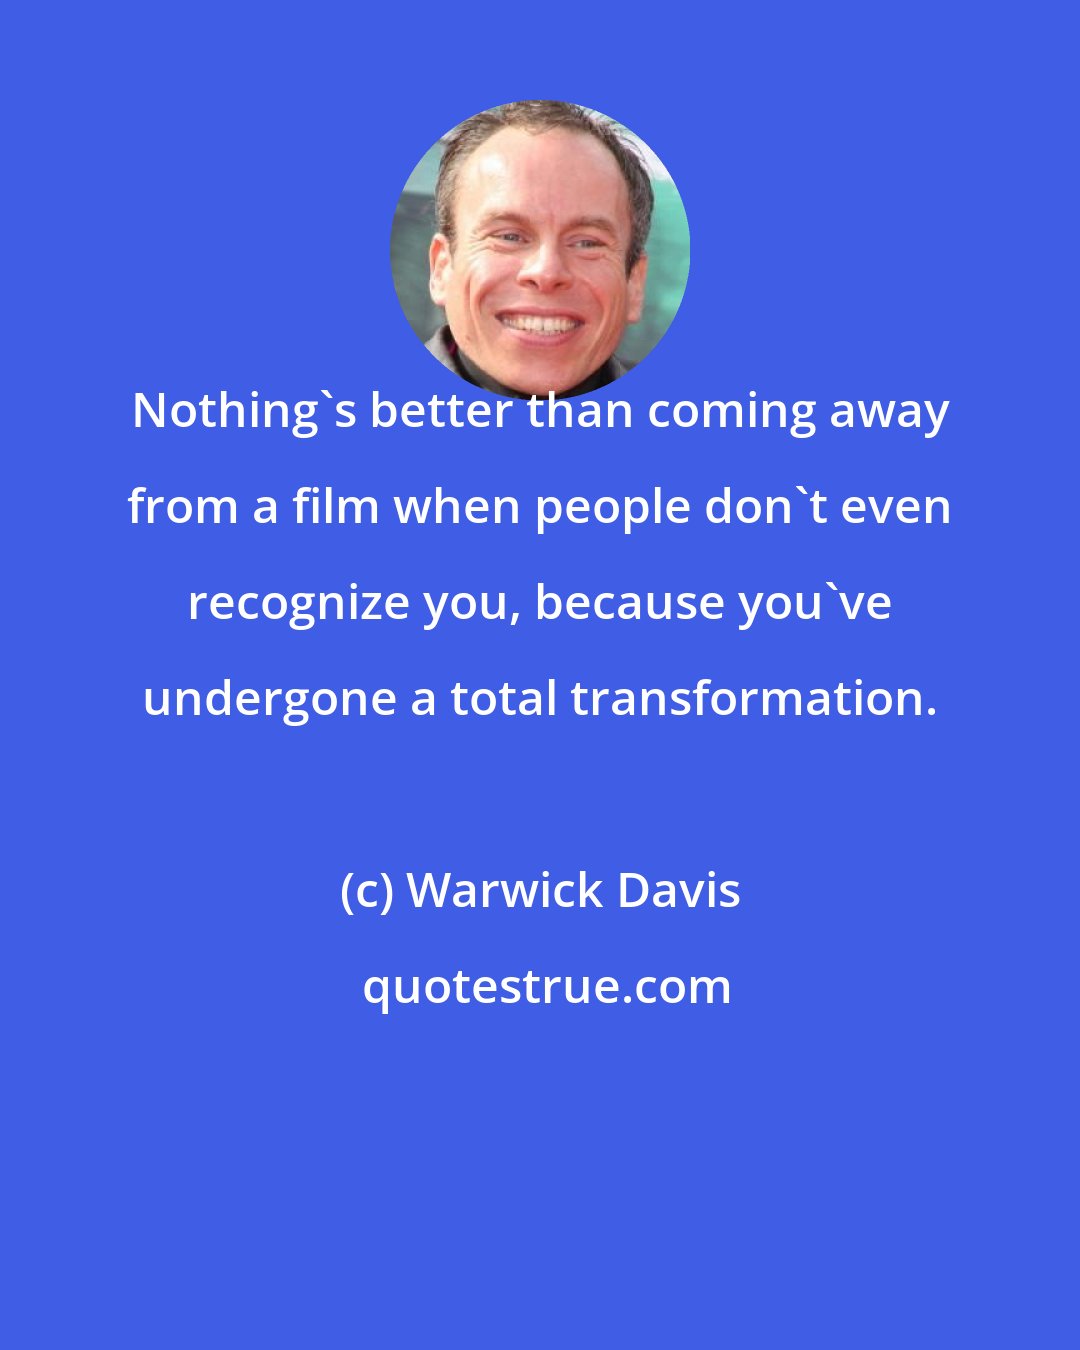 Warwick Davis: Nothing's better than coming away from a film when people don't even recognize you, because you've undergone a total transformation.